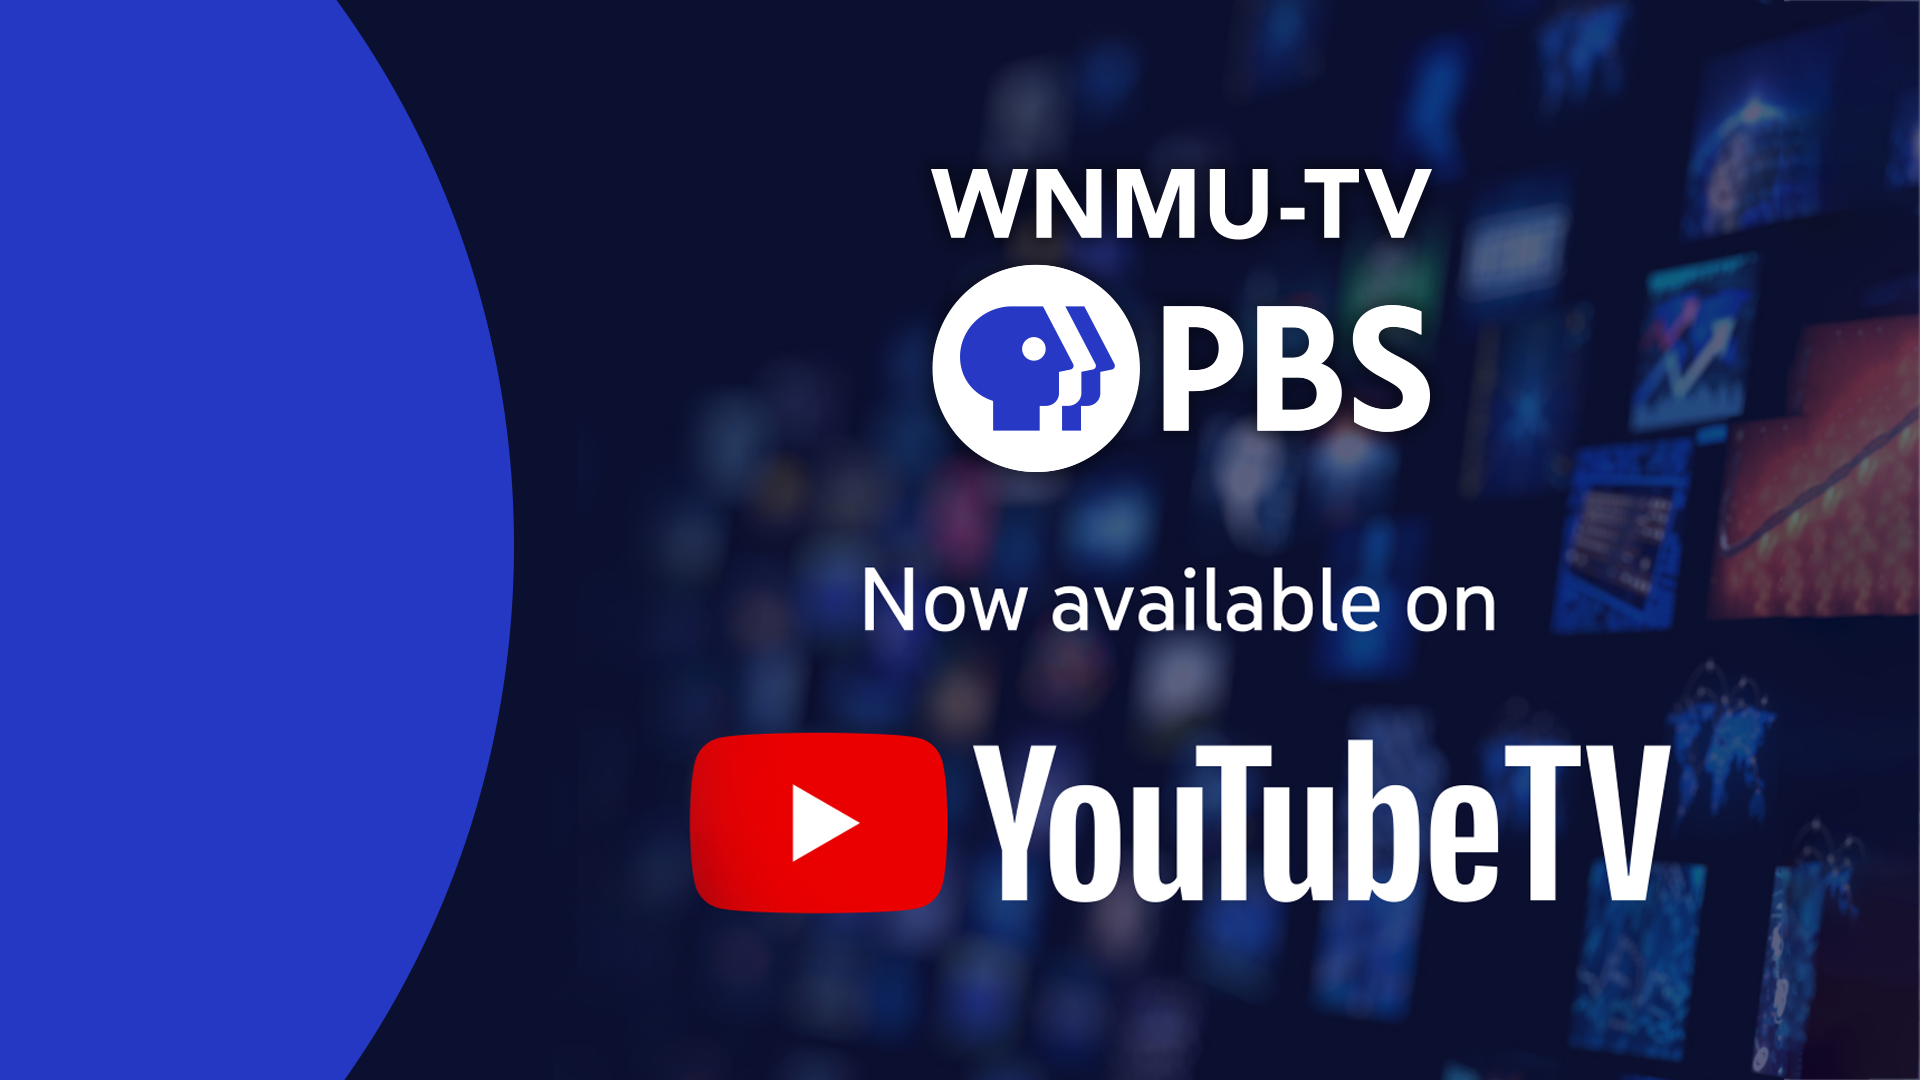 WNMU-TV PBS Now Available on YouTube TV